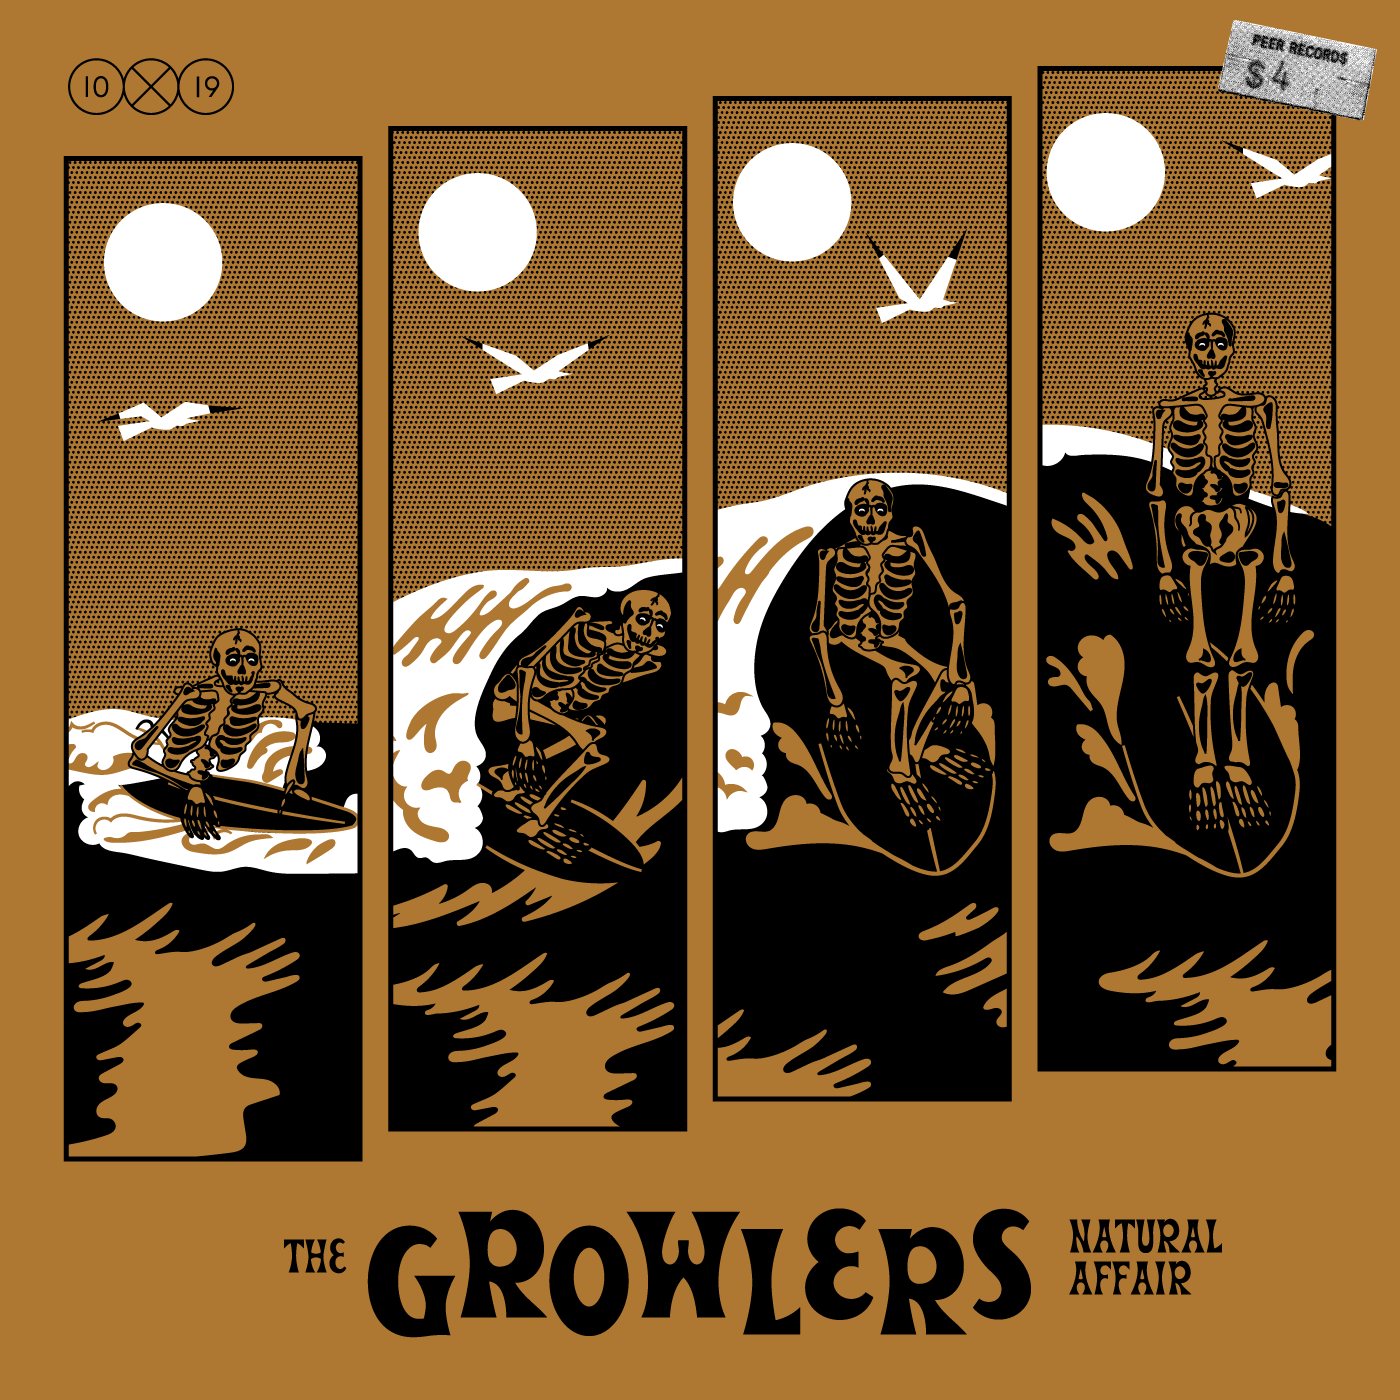 The Growlers album cover by Amy Hood for 10x19